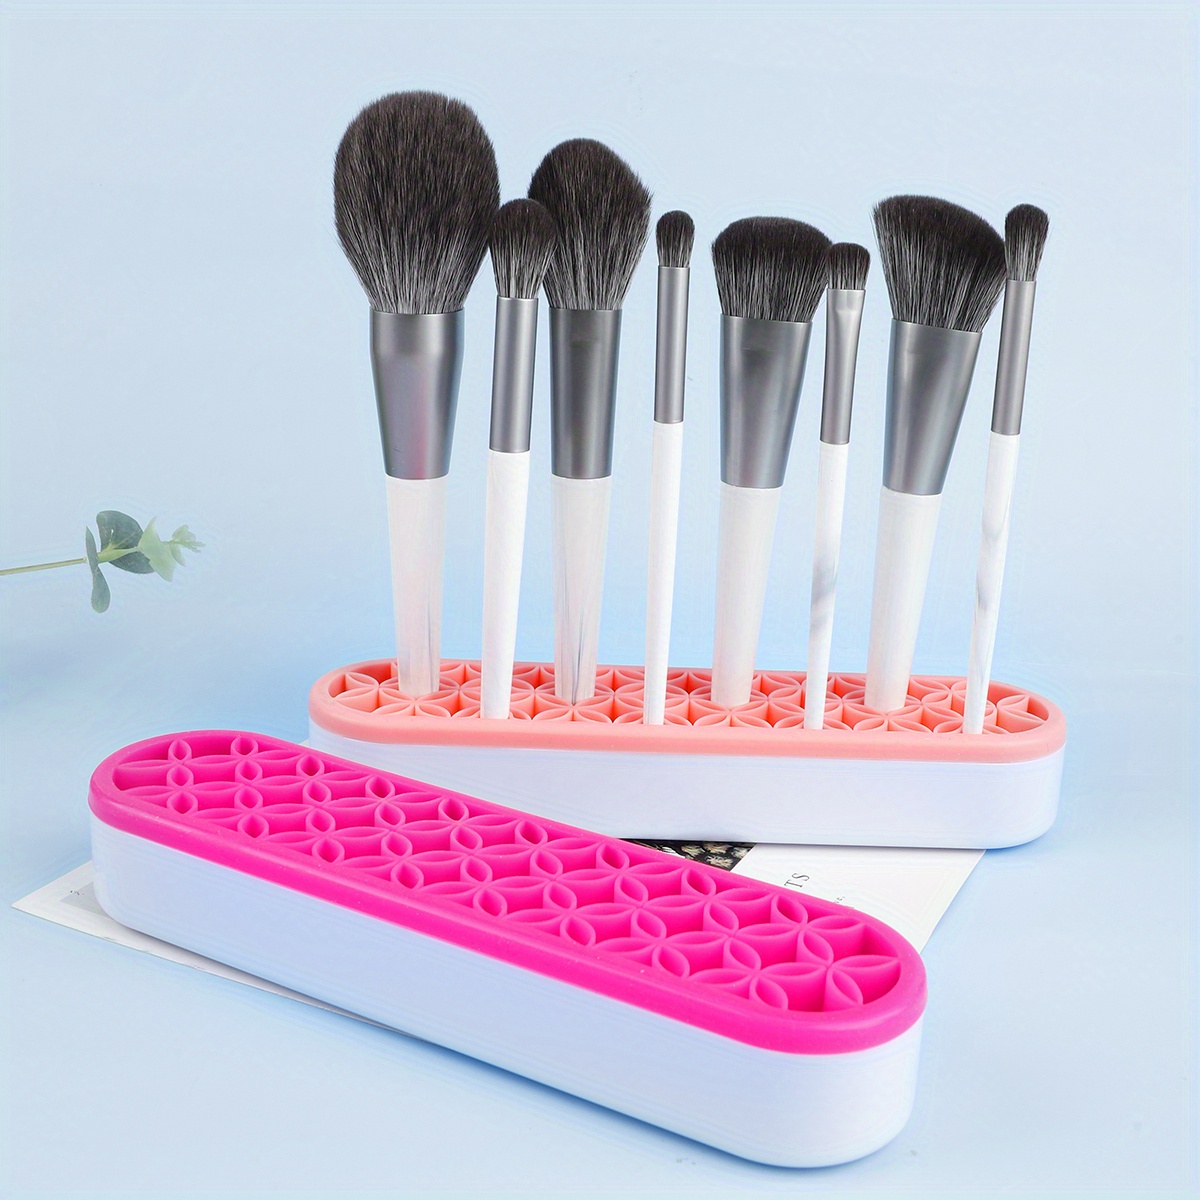 1pc Makeup Brushes Drying Rack, Brushes Dryer, Collapsible 28 Slot Acrylic  Brush Holder Stand Tree Tray Support Display For Makeup Artist Acrylic Nail